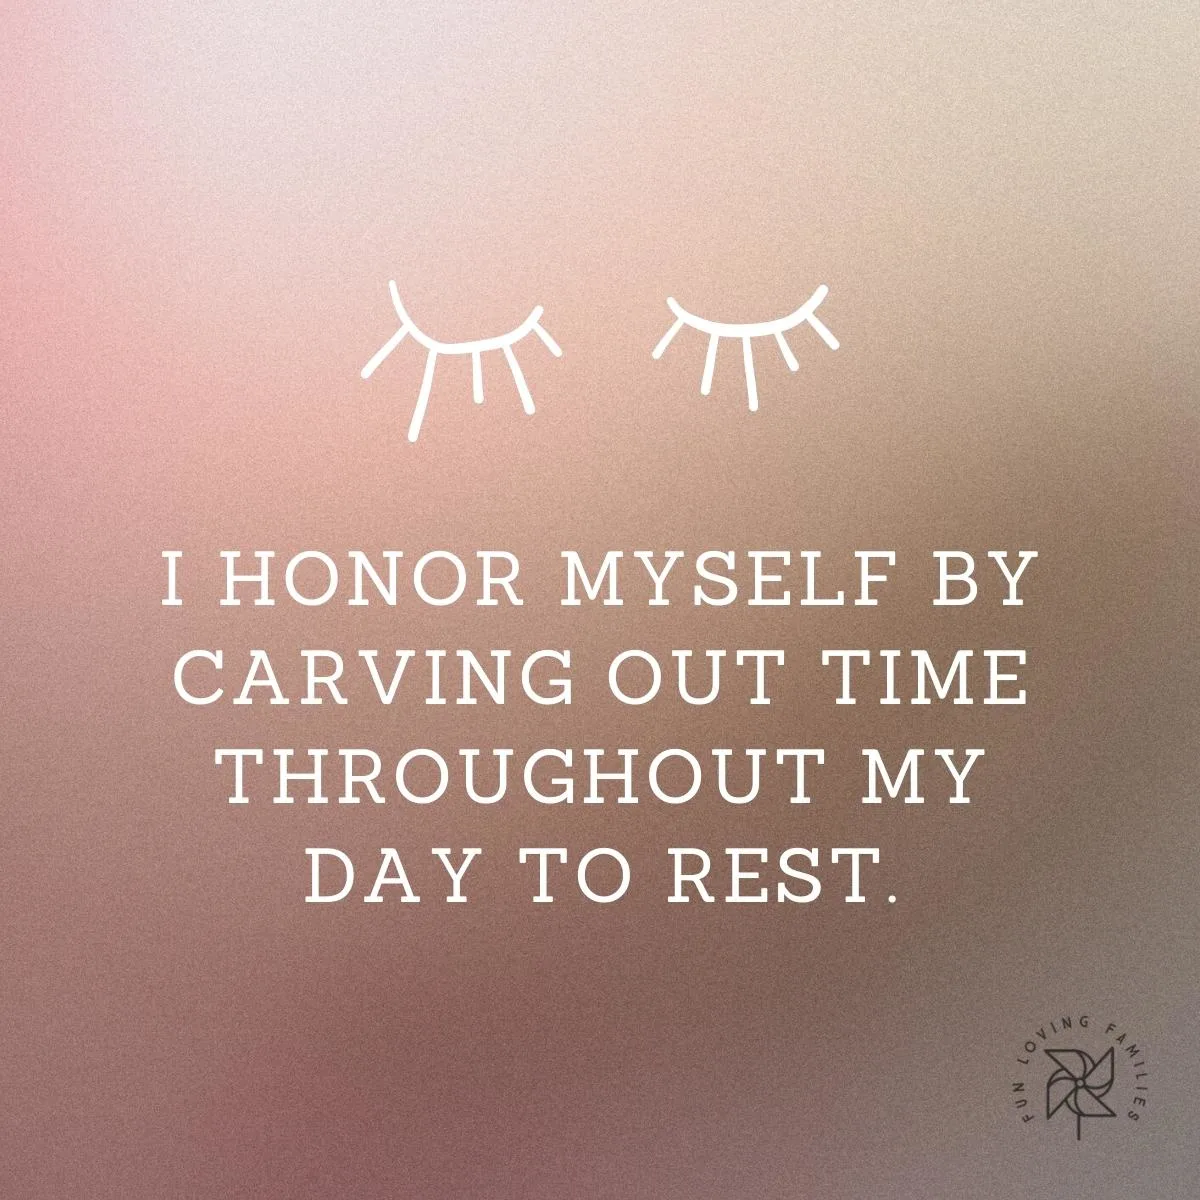 I honor myself by carving out time throughout my day to rest affirmation